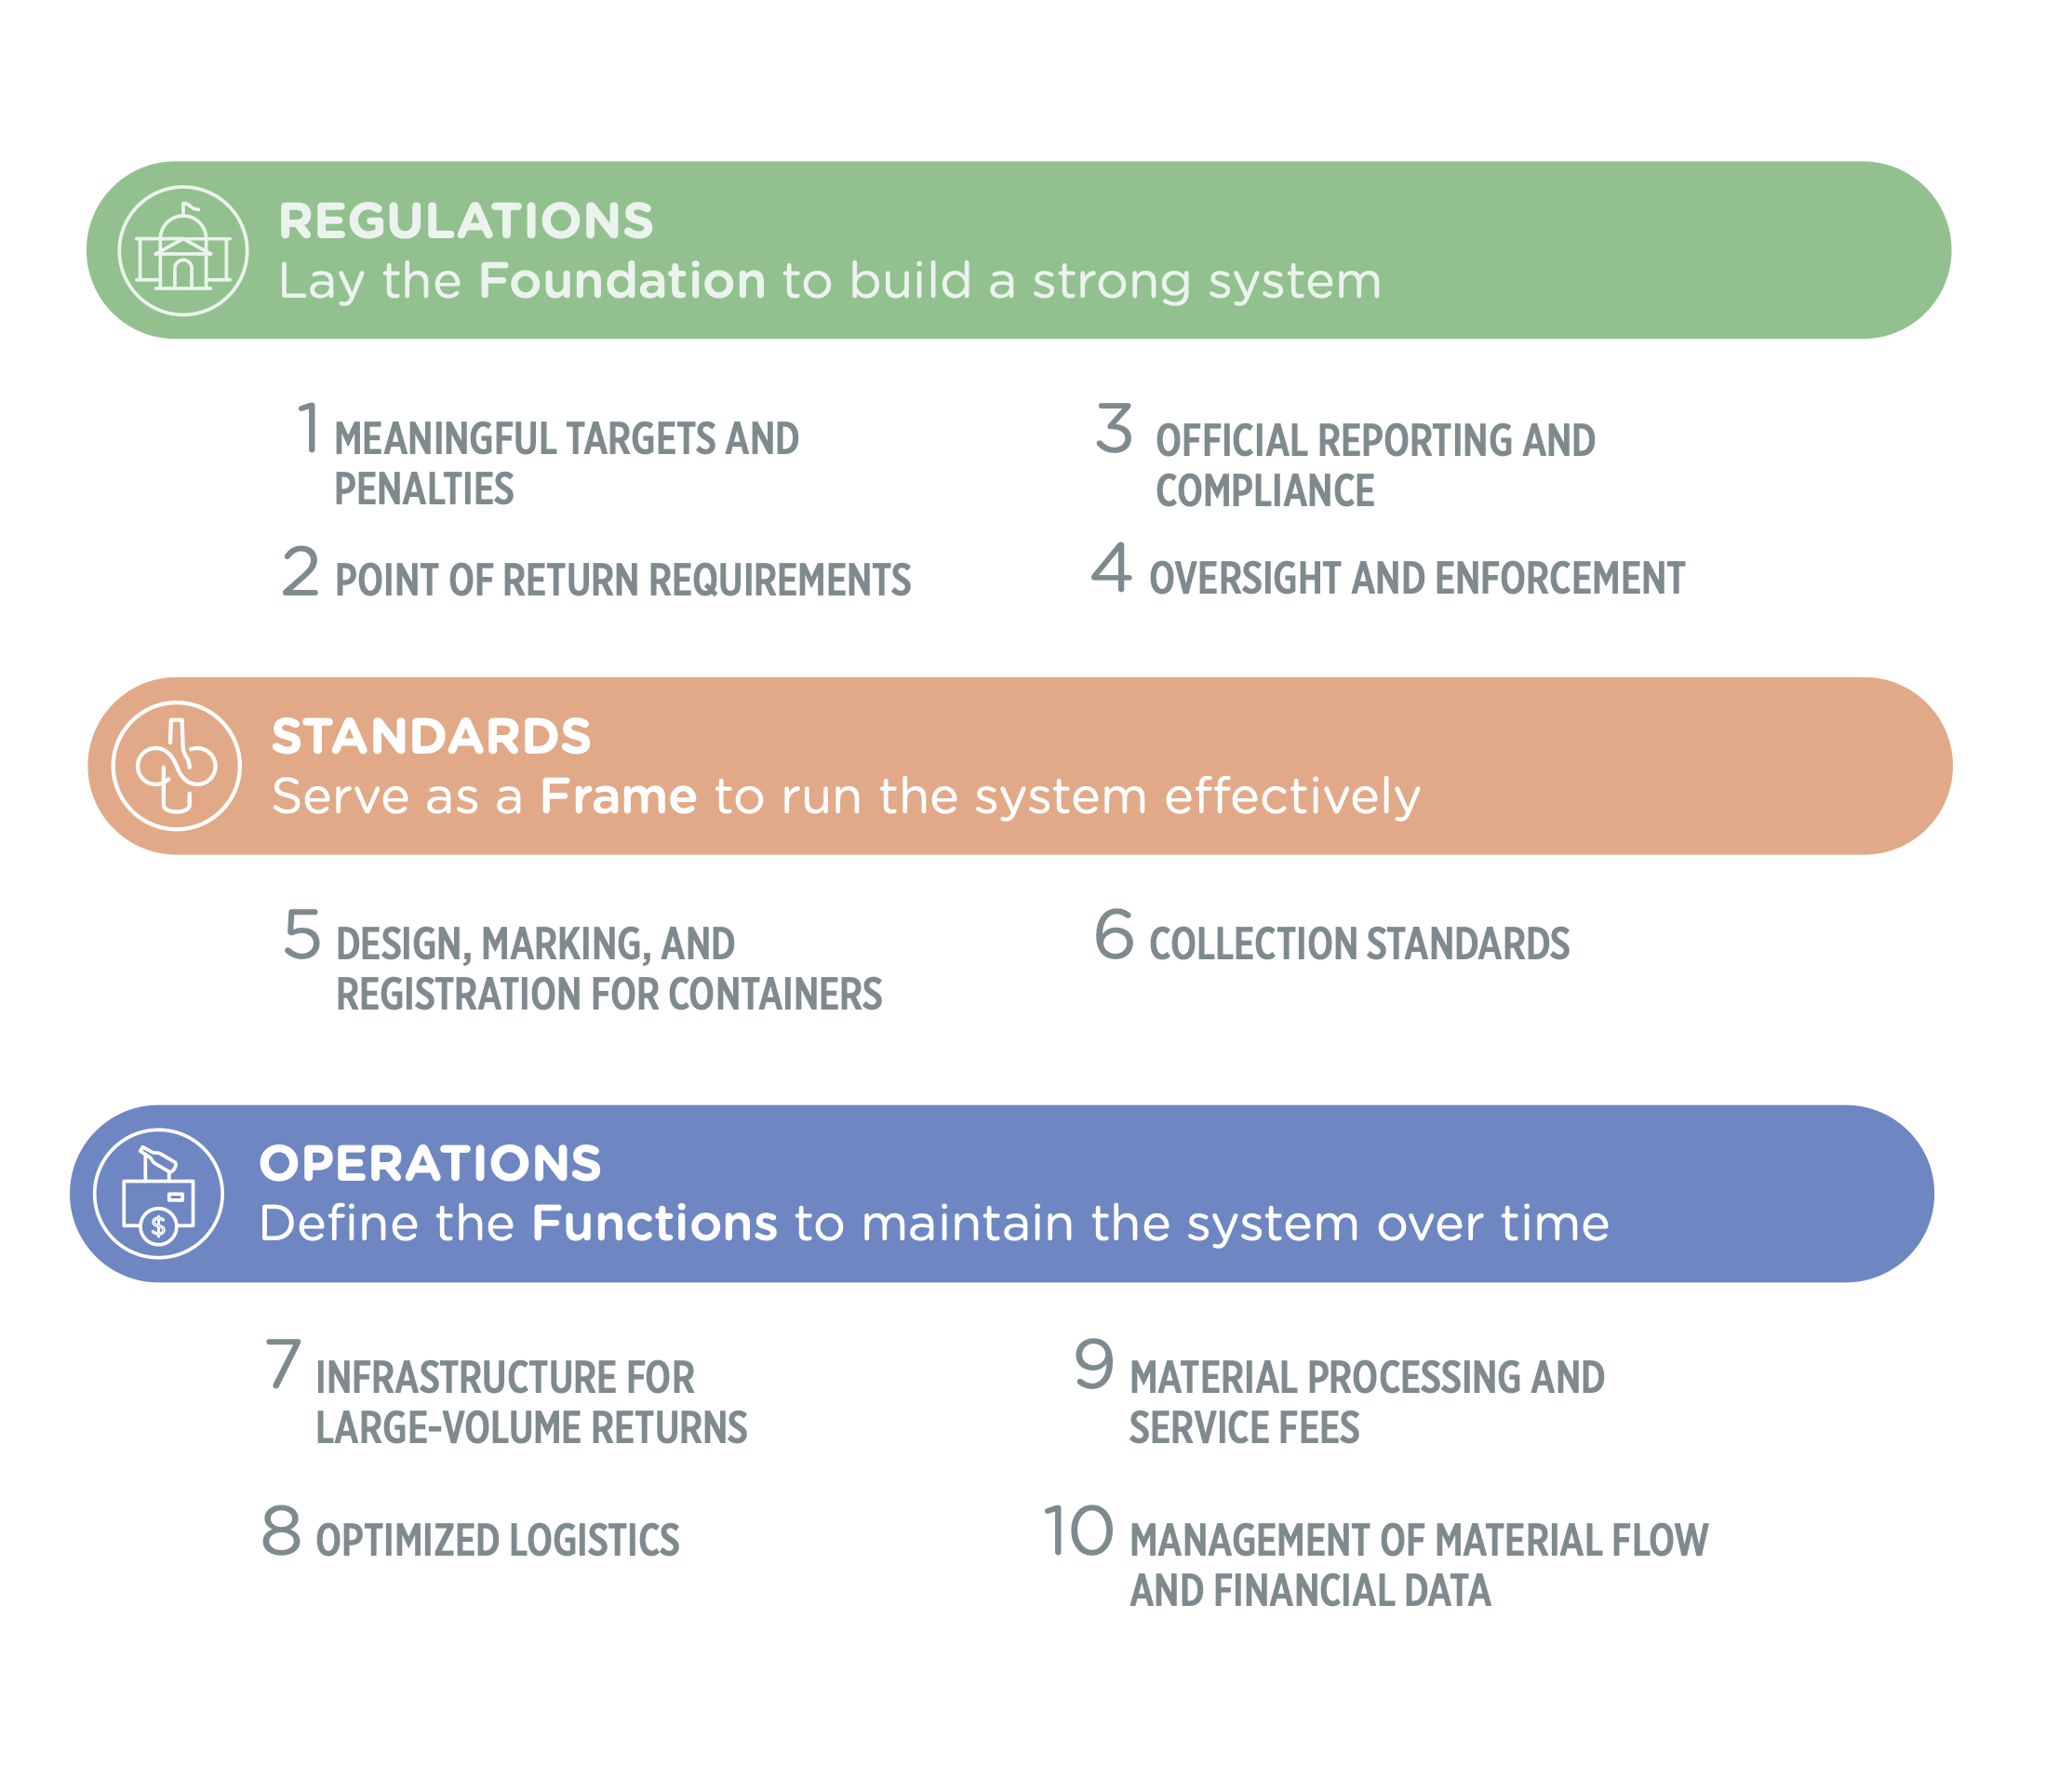 Regulations, standards, and operations are the three areas of focus for Practices